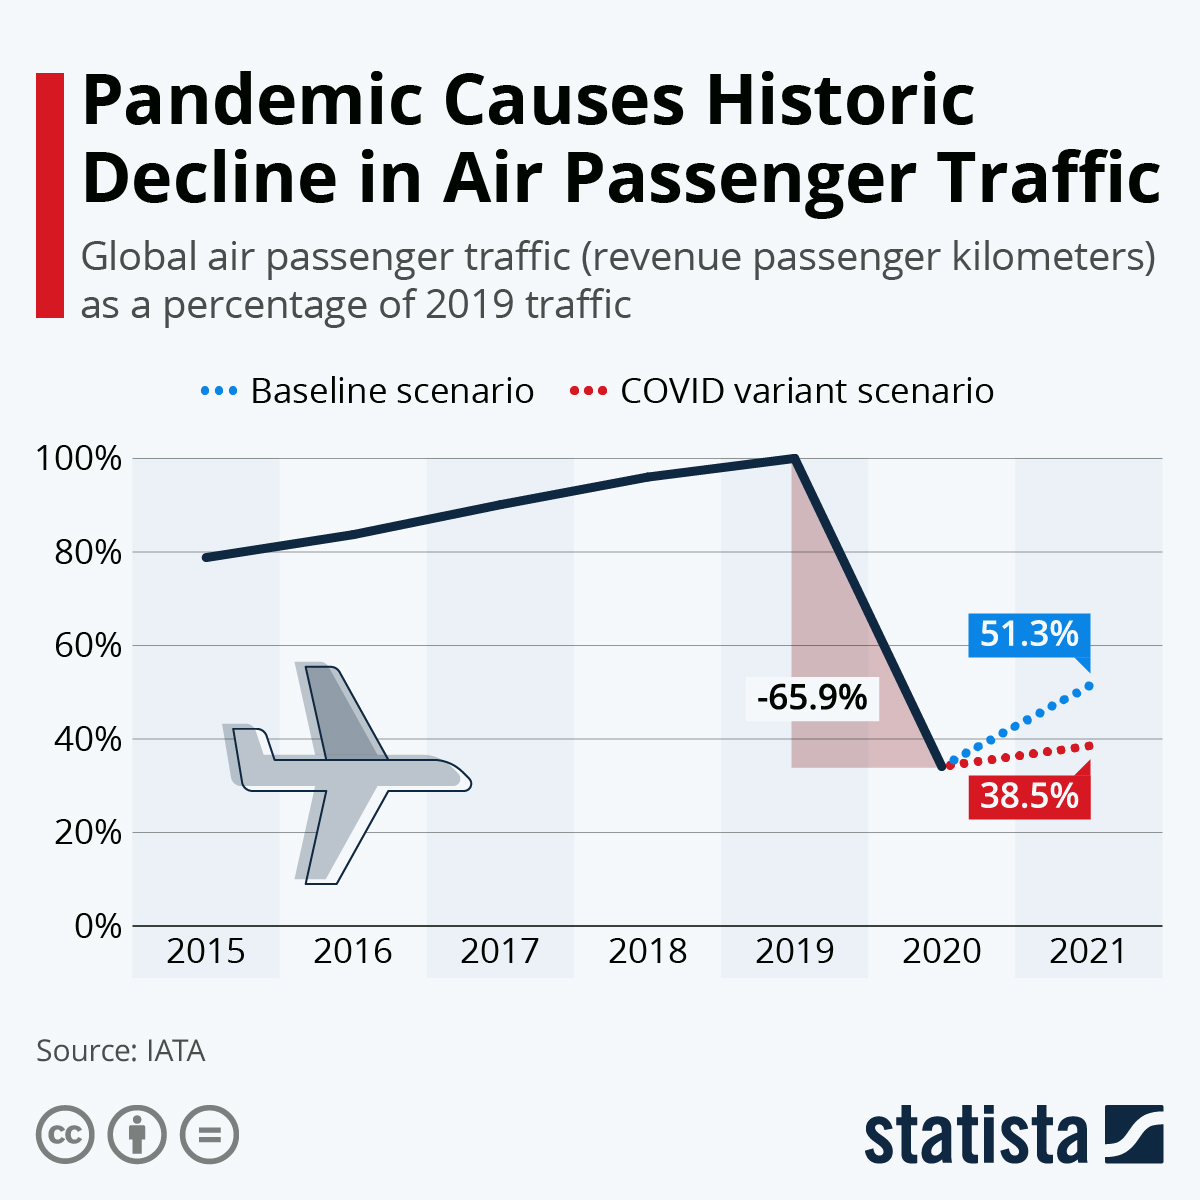 Pandemic Causes Historic Decline in Air Passenger Traffic